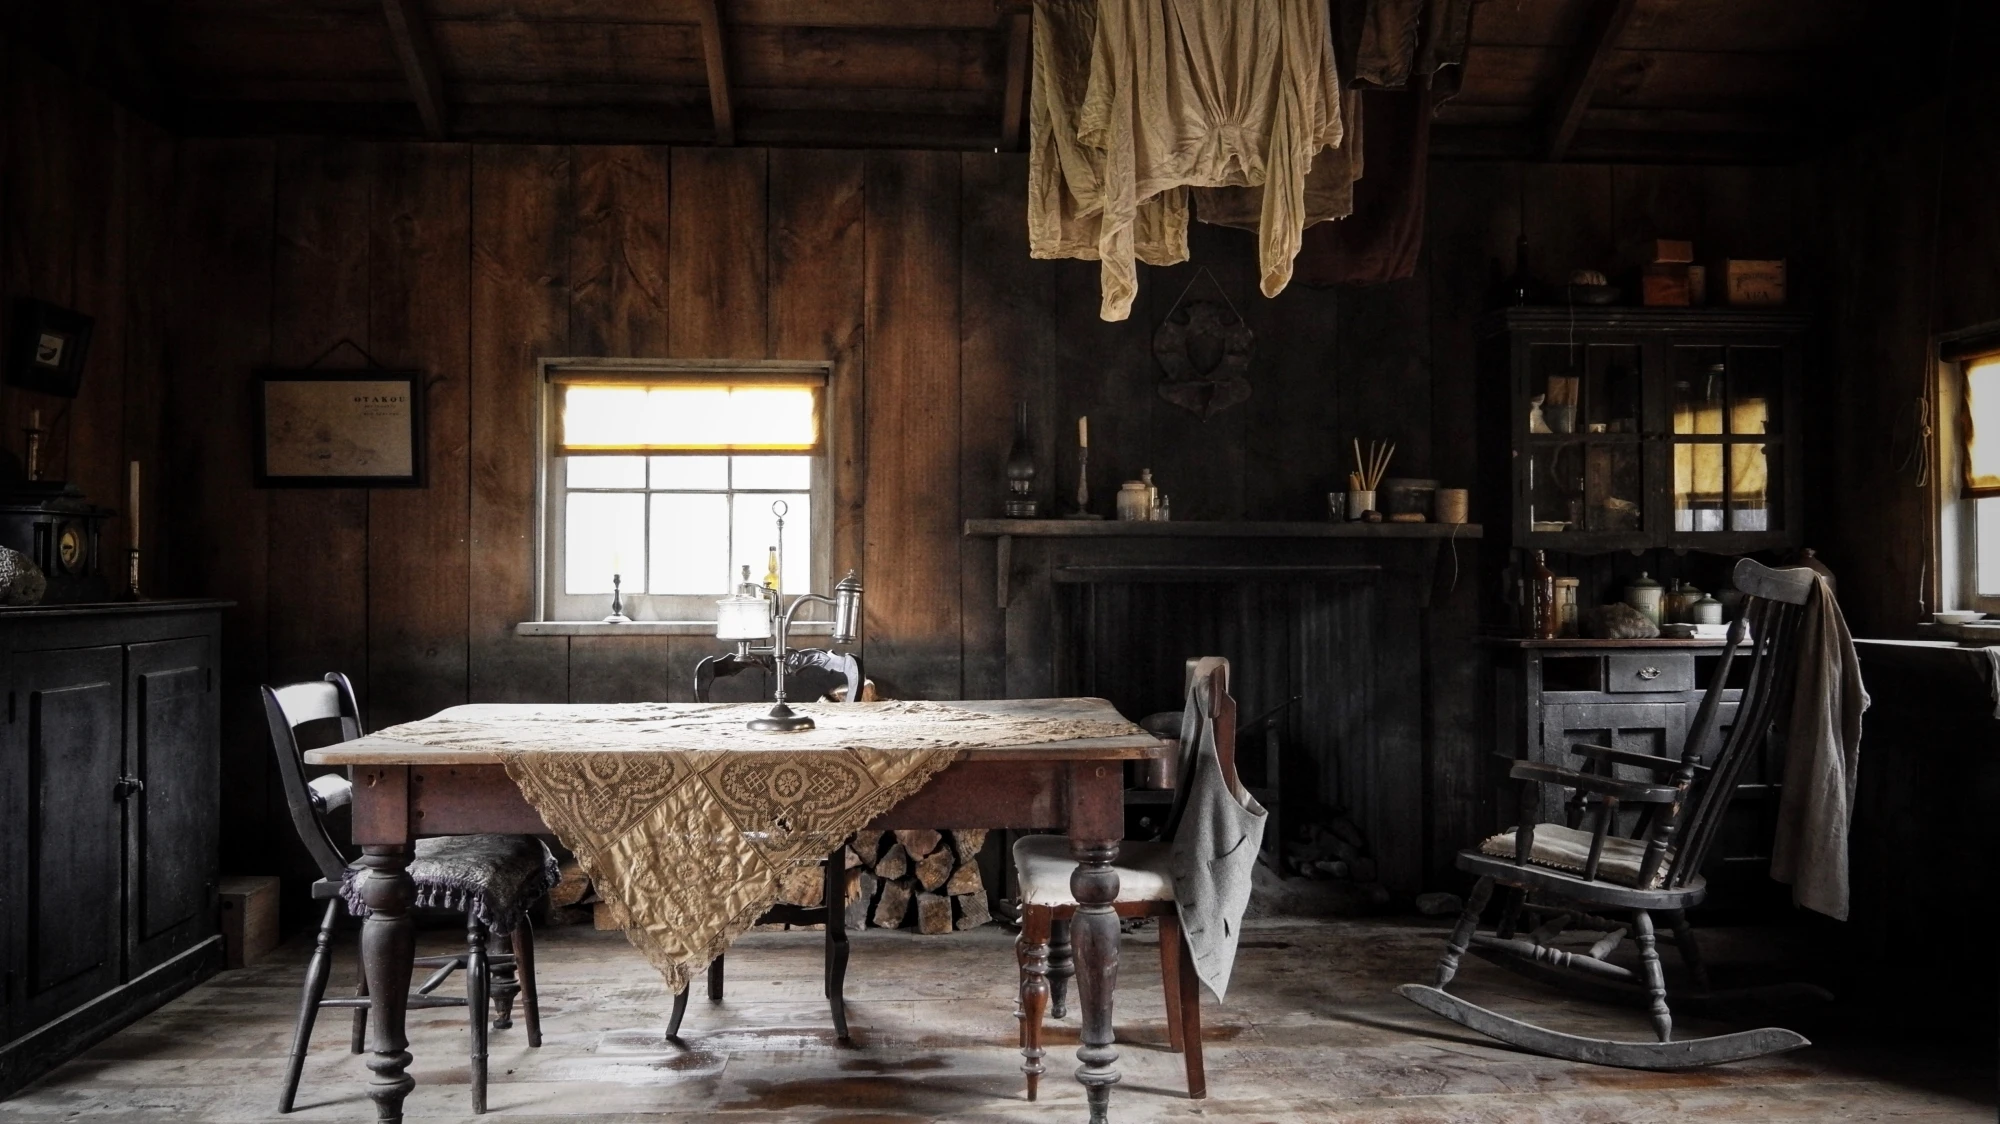 Interior view of an old house with wooden walls and furniture and decorated with antique objects from lat 1800s. 